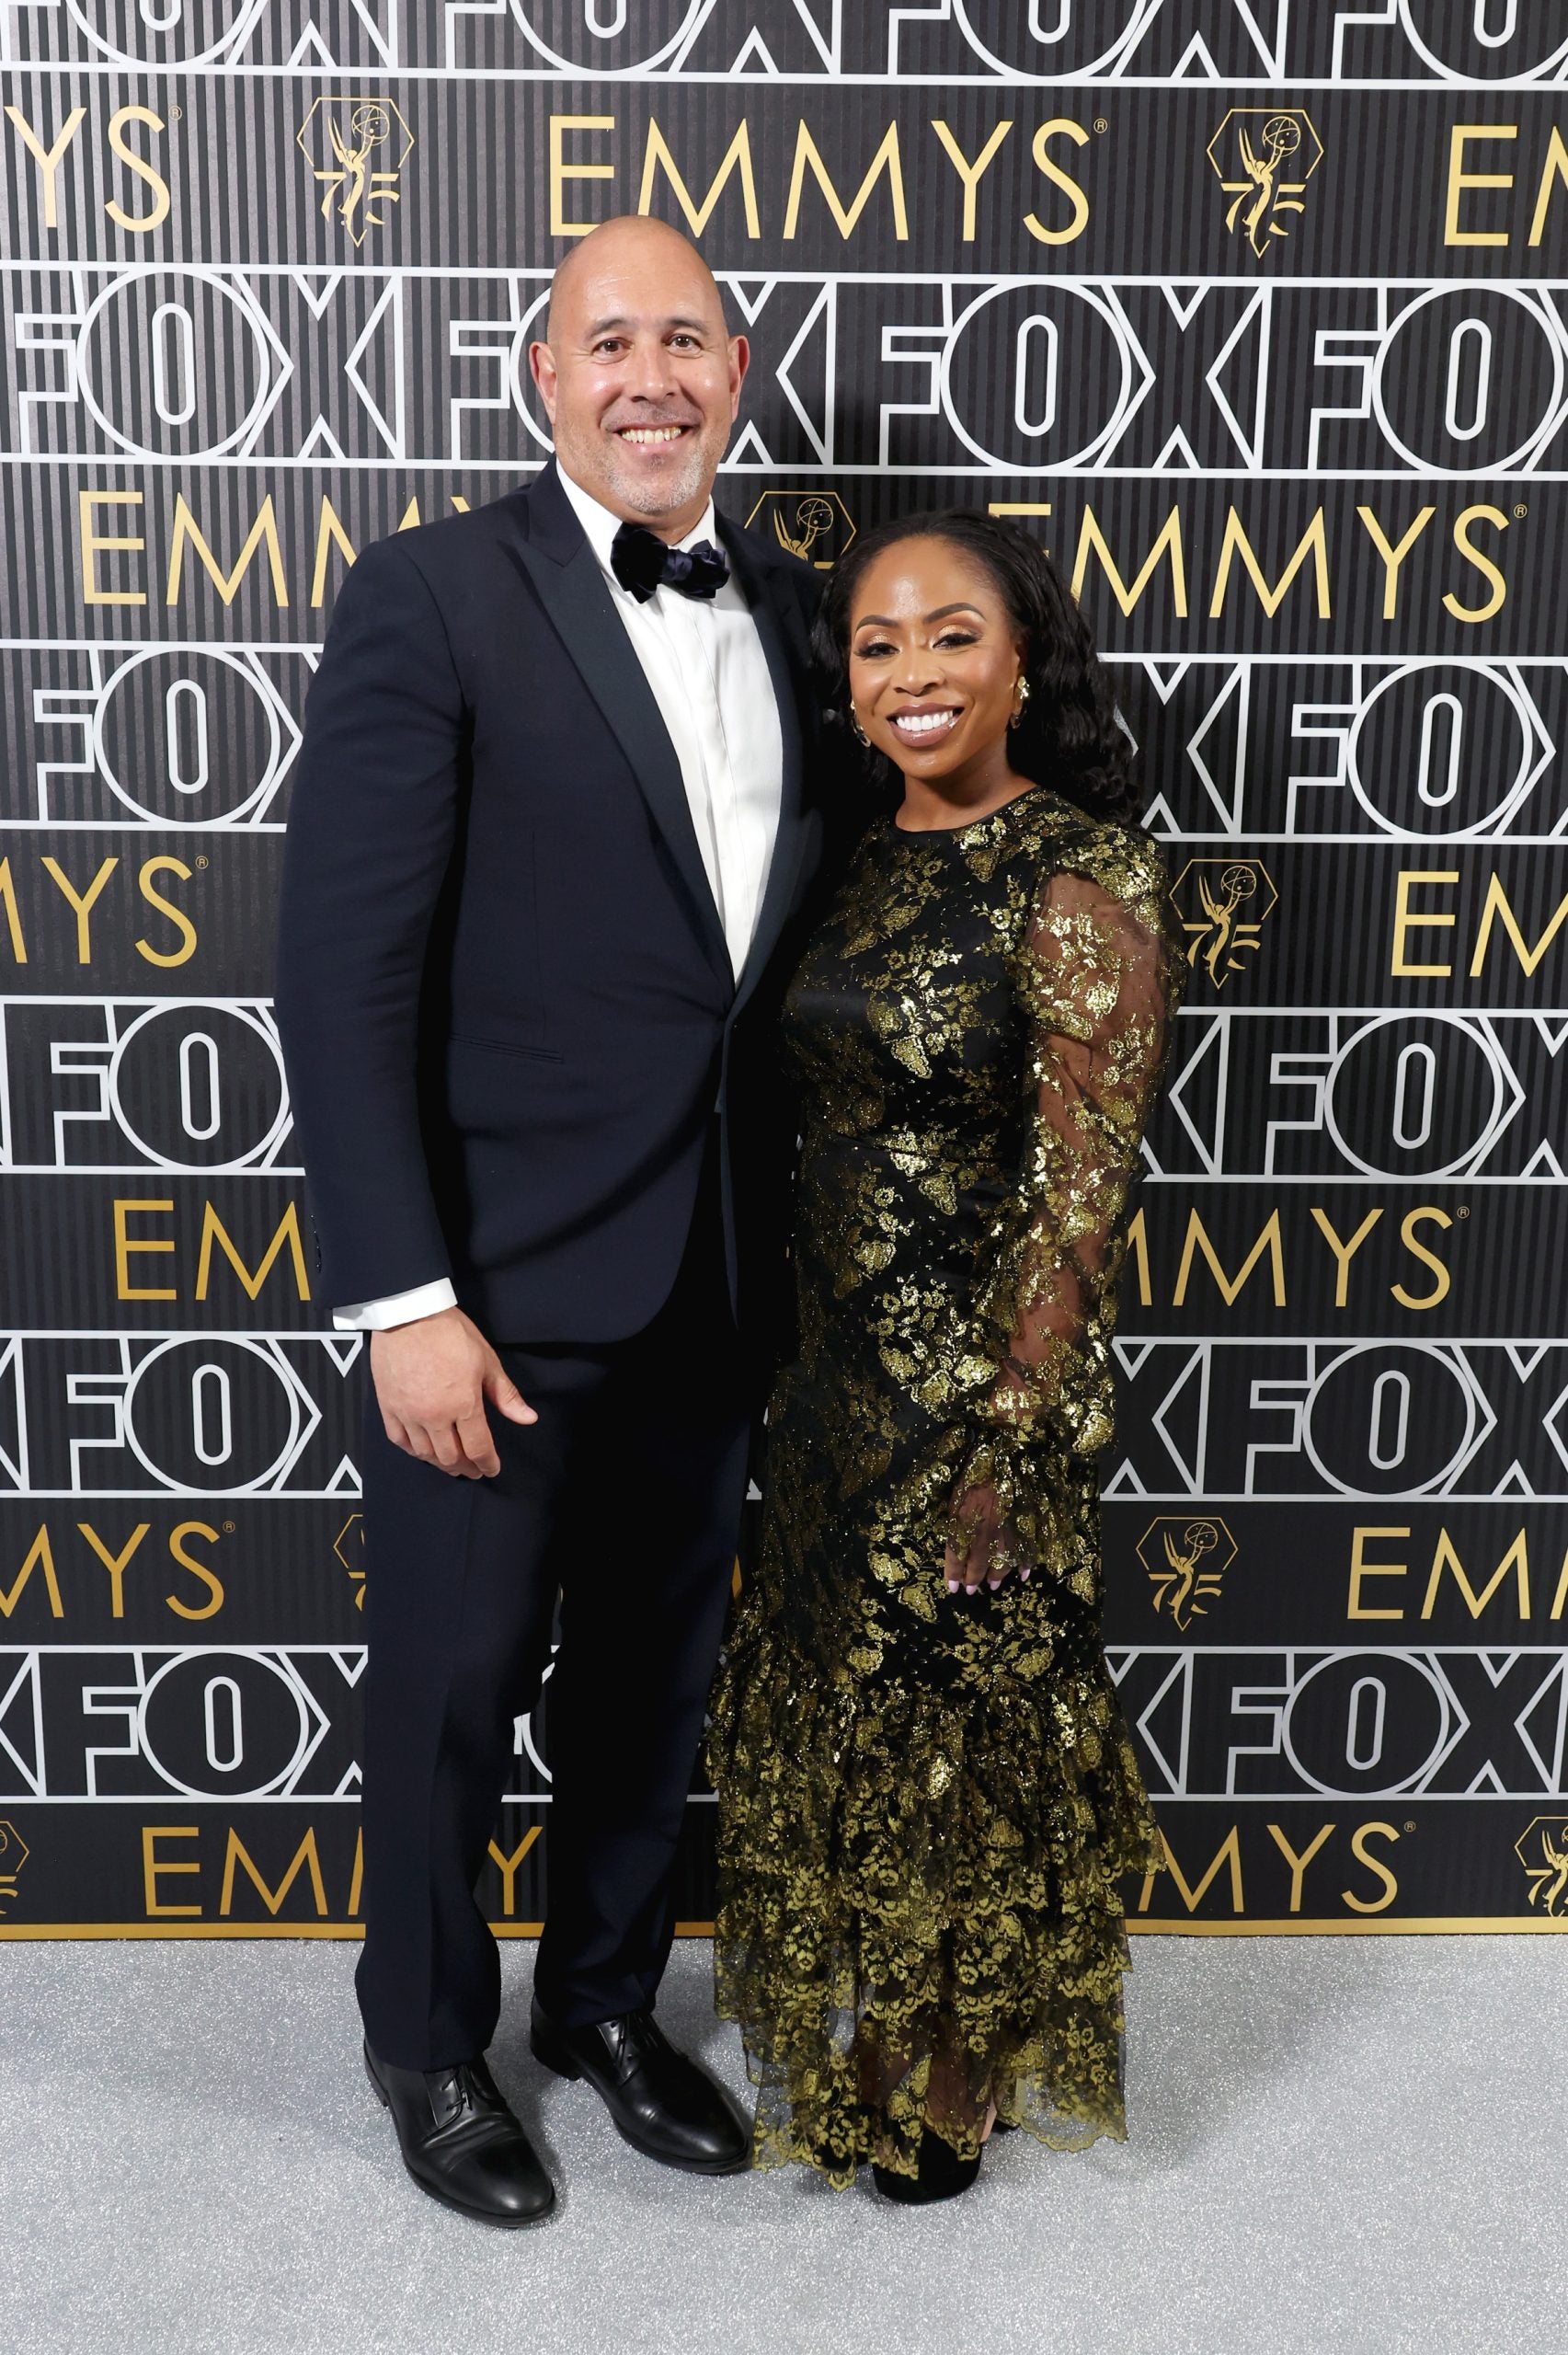 Black Love Was Present At The Emmys This Year: Check Out These Cute Celebrity Couples